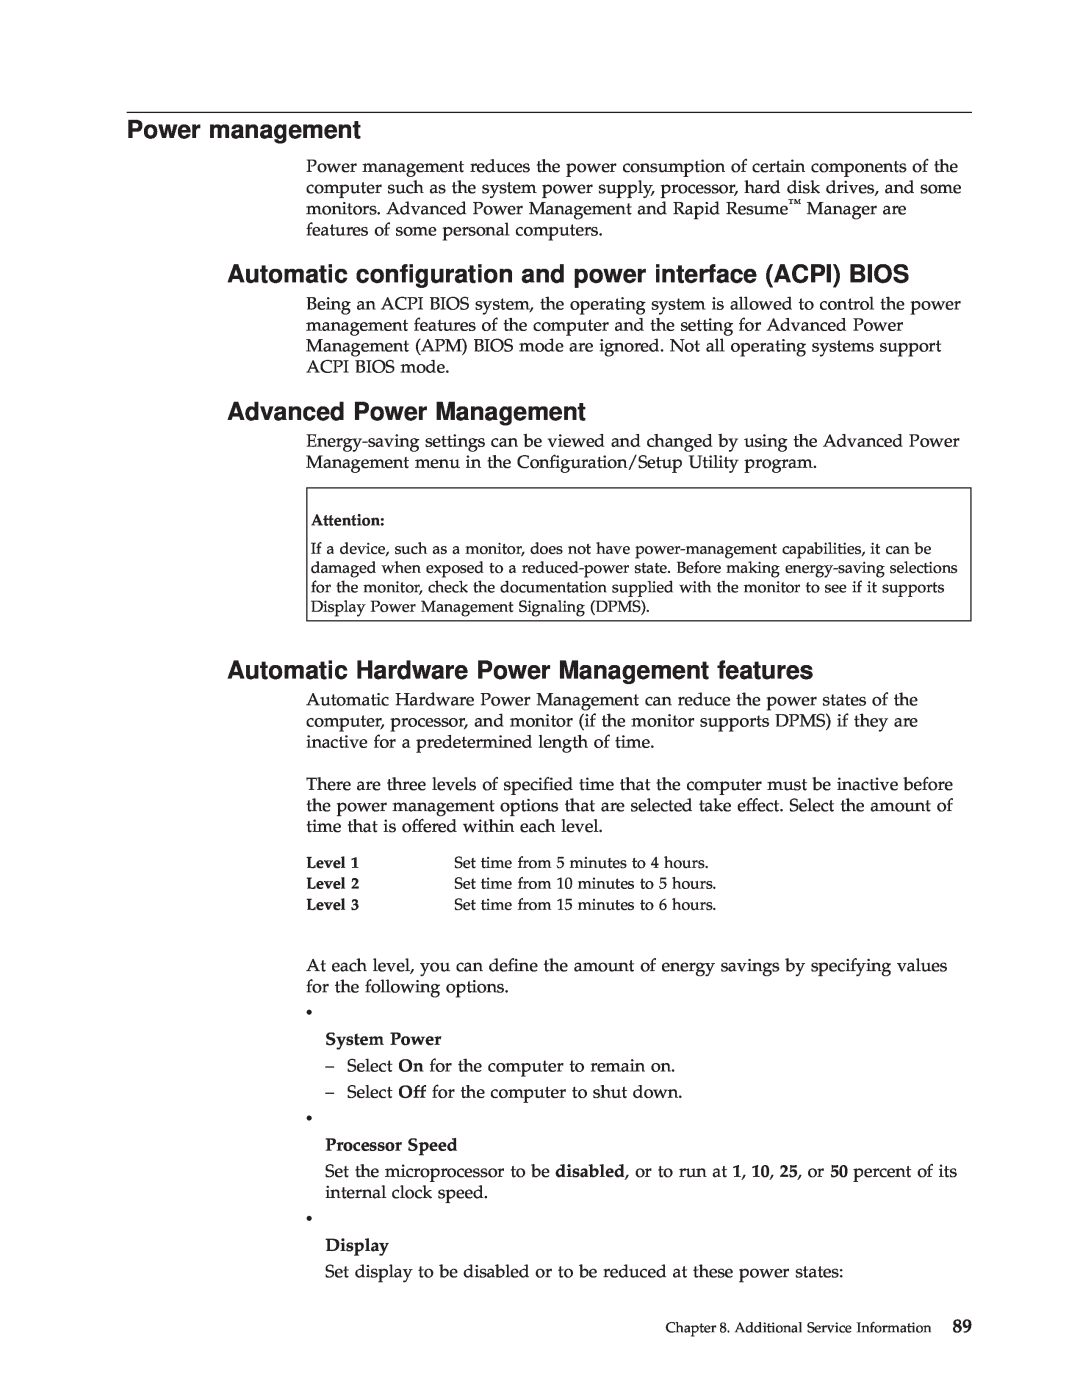 IBM A40 TYPE 6840 manual Power management, Automatic configuration and power interface ACPI BIOS, Advanced Power Management 